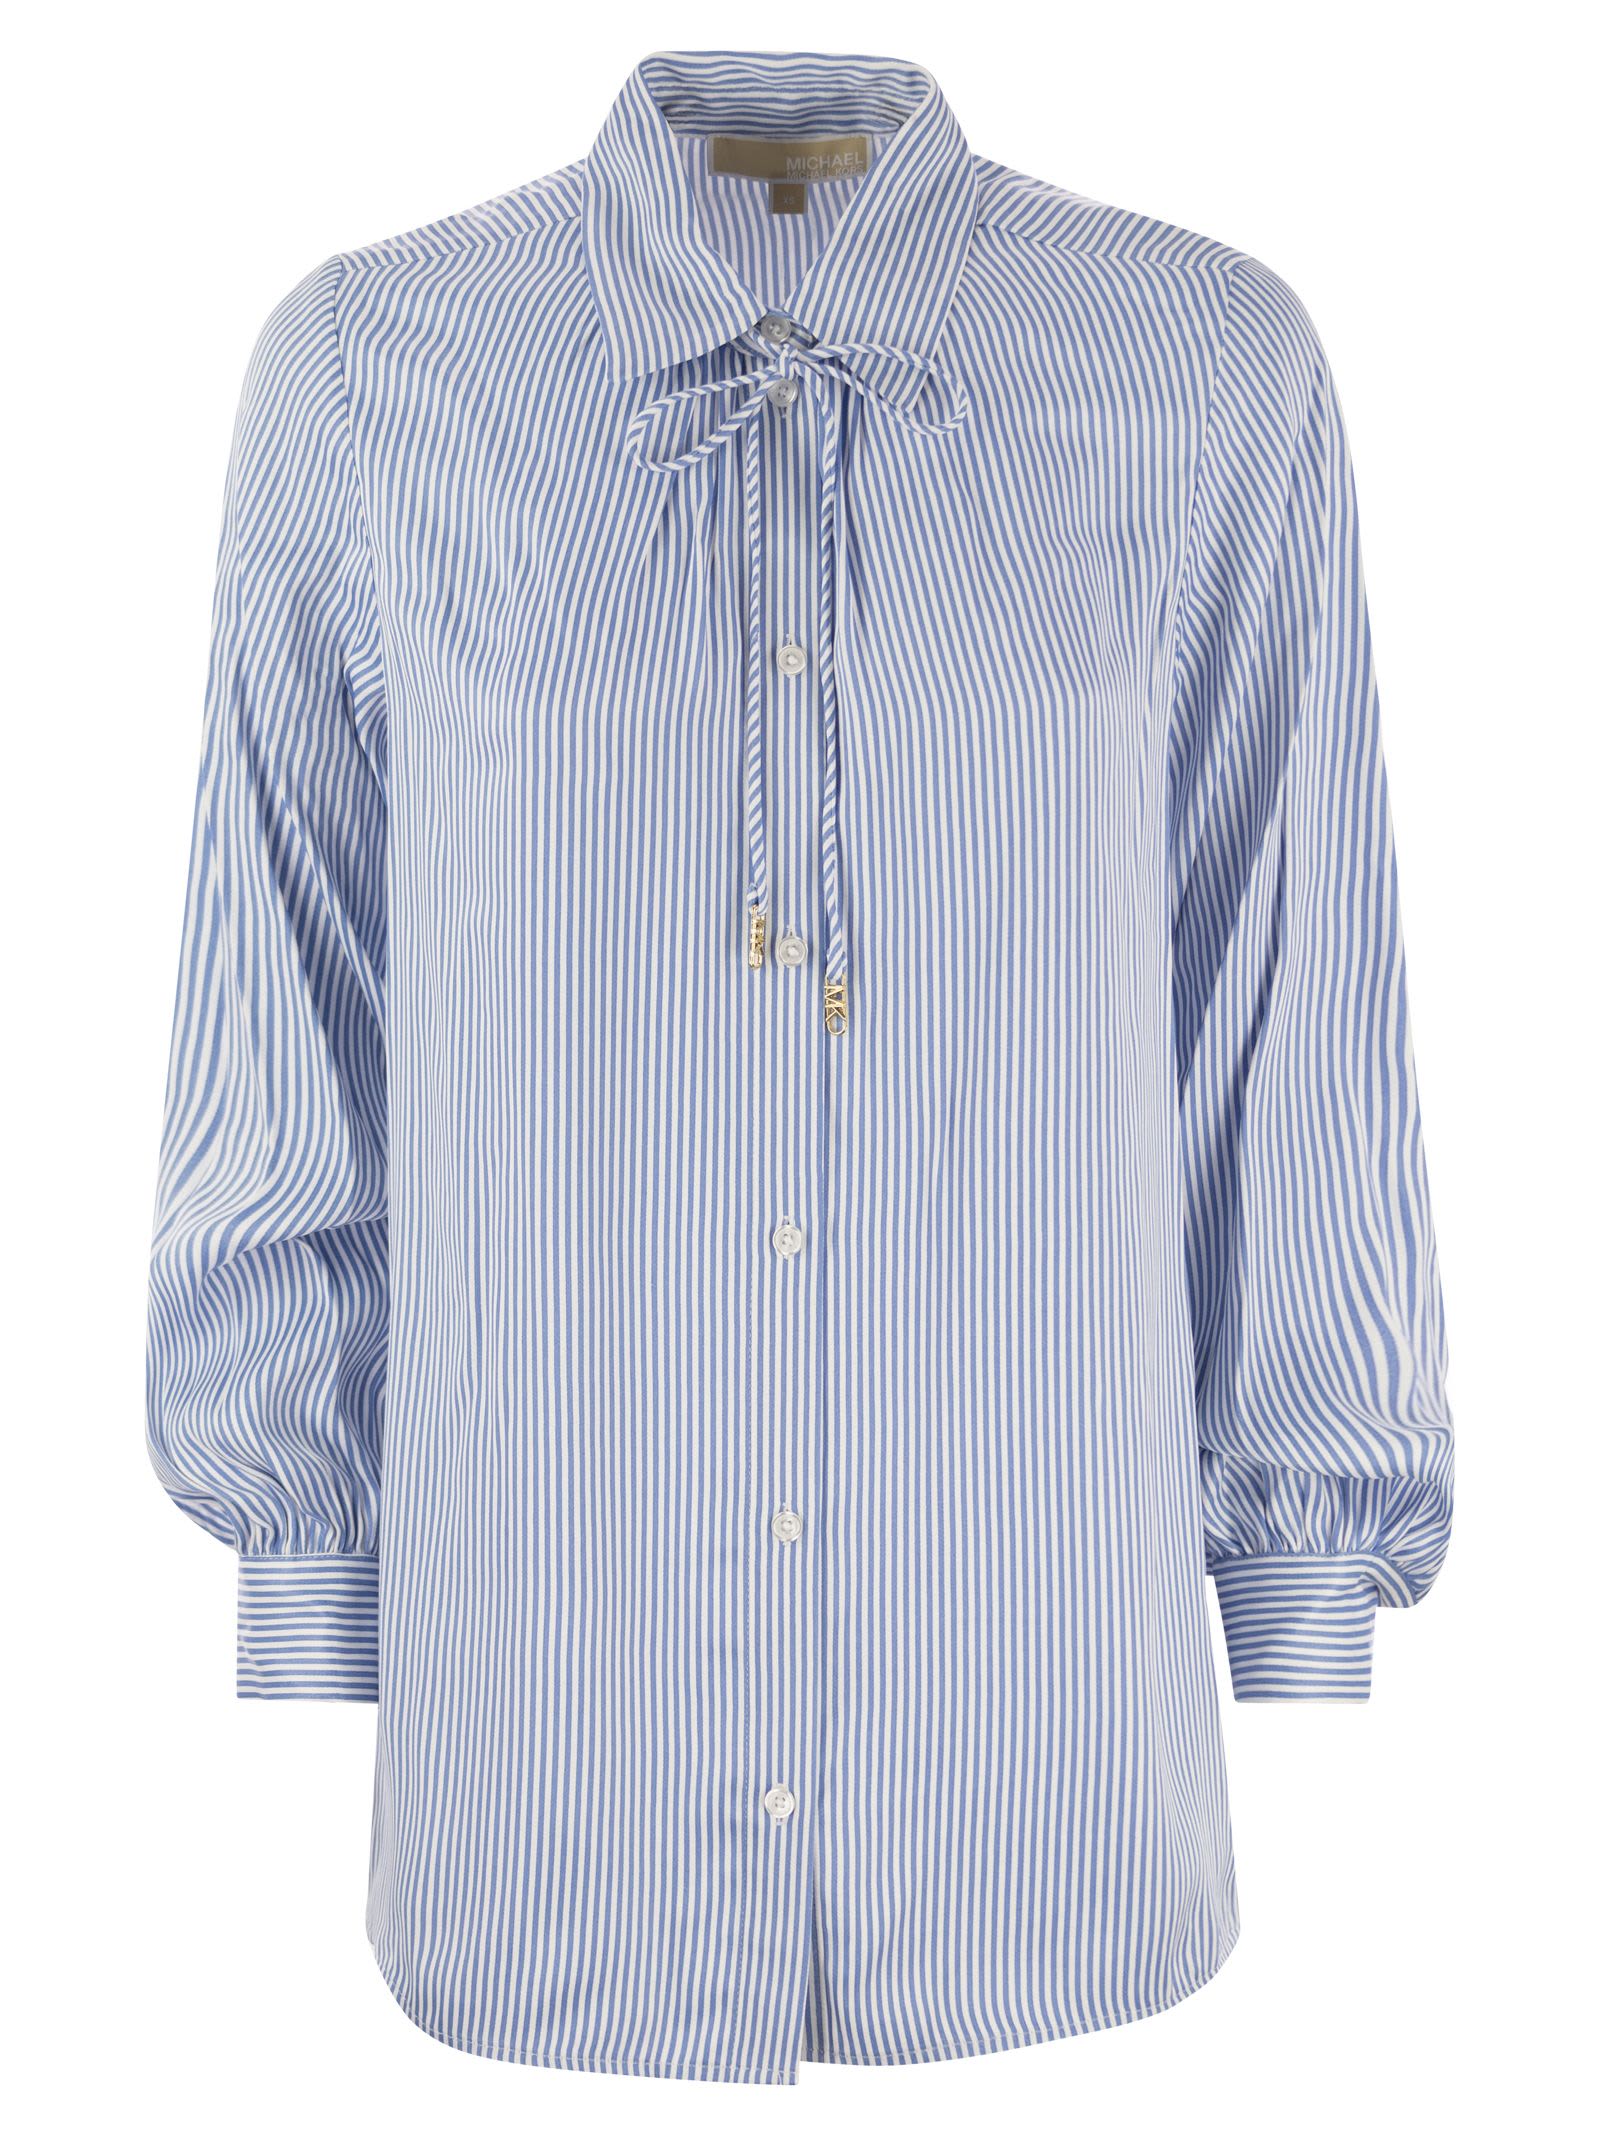 MICHAEL KORS STRIPED VISCOSE SHIRT WITH FRONT FASTENING